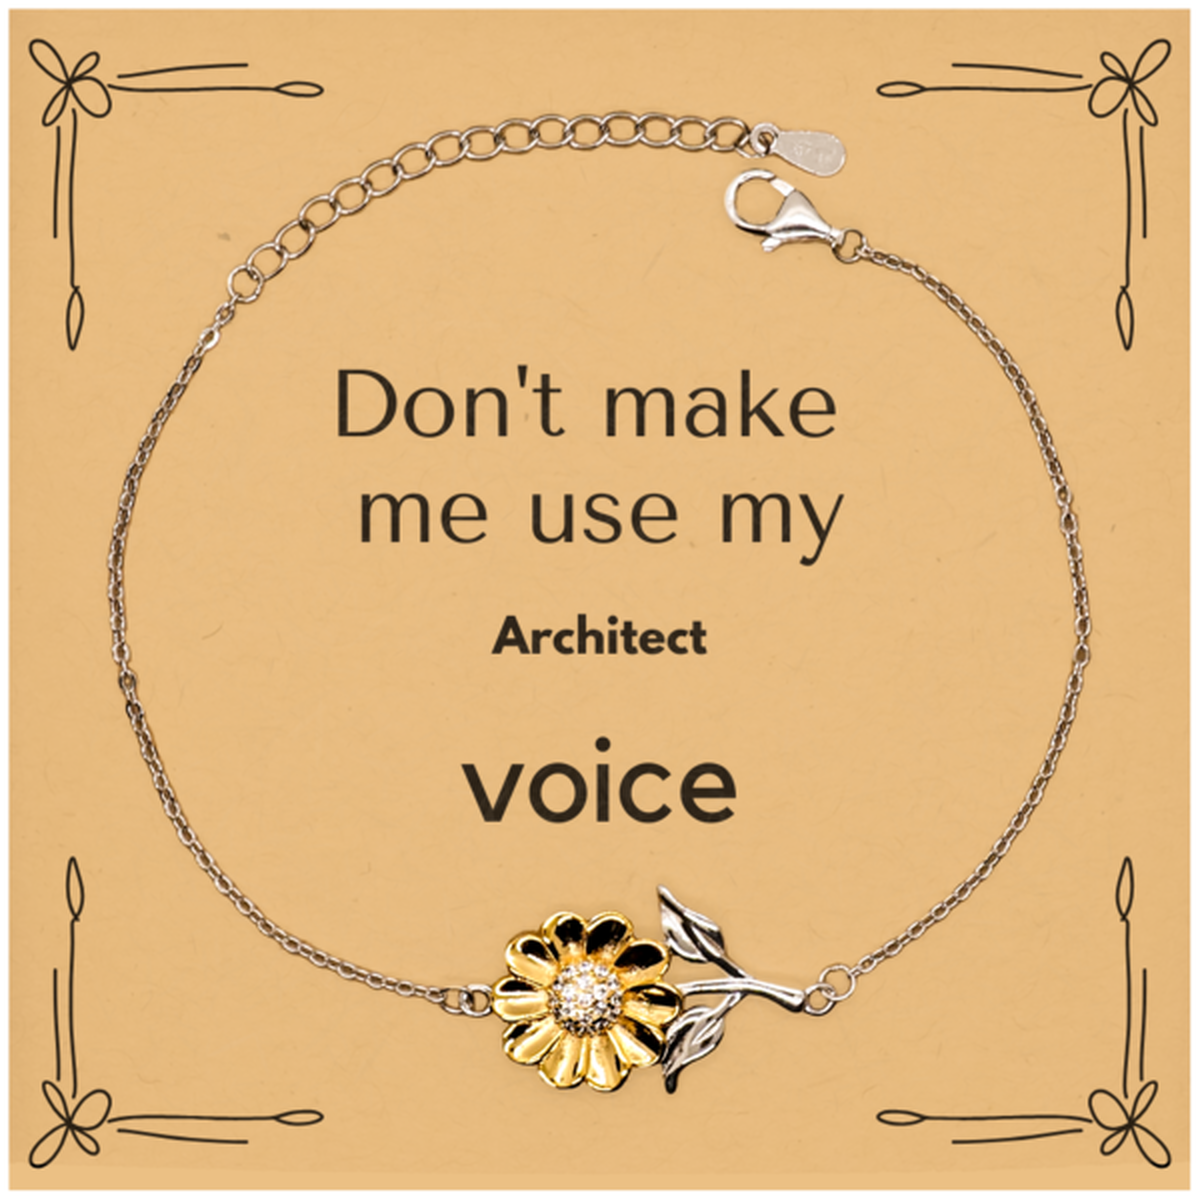 Don't make me use my Architect voice, Sarcasm Architect Card Gifts, Christmas Architect Sunflower Bracelet Birthday Unique Gifts For Architect Coworkers, Men, Women, Colleague, Friends